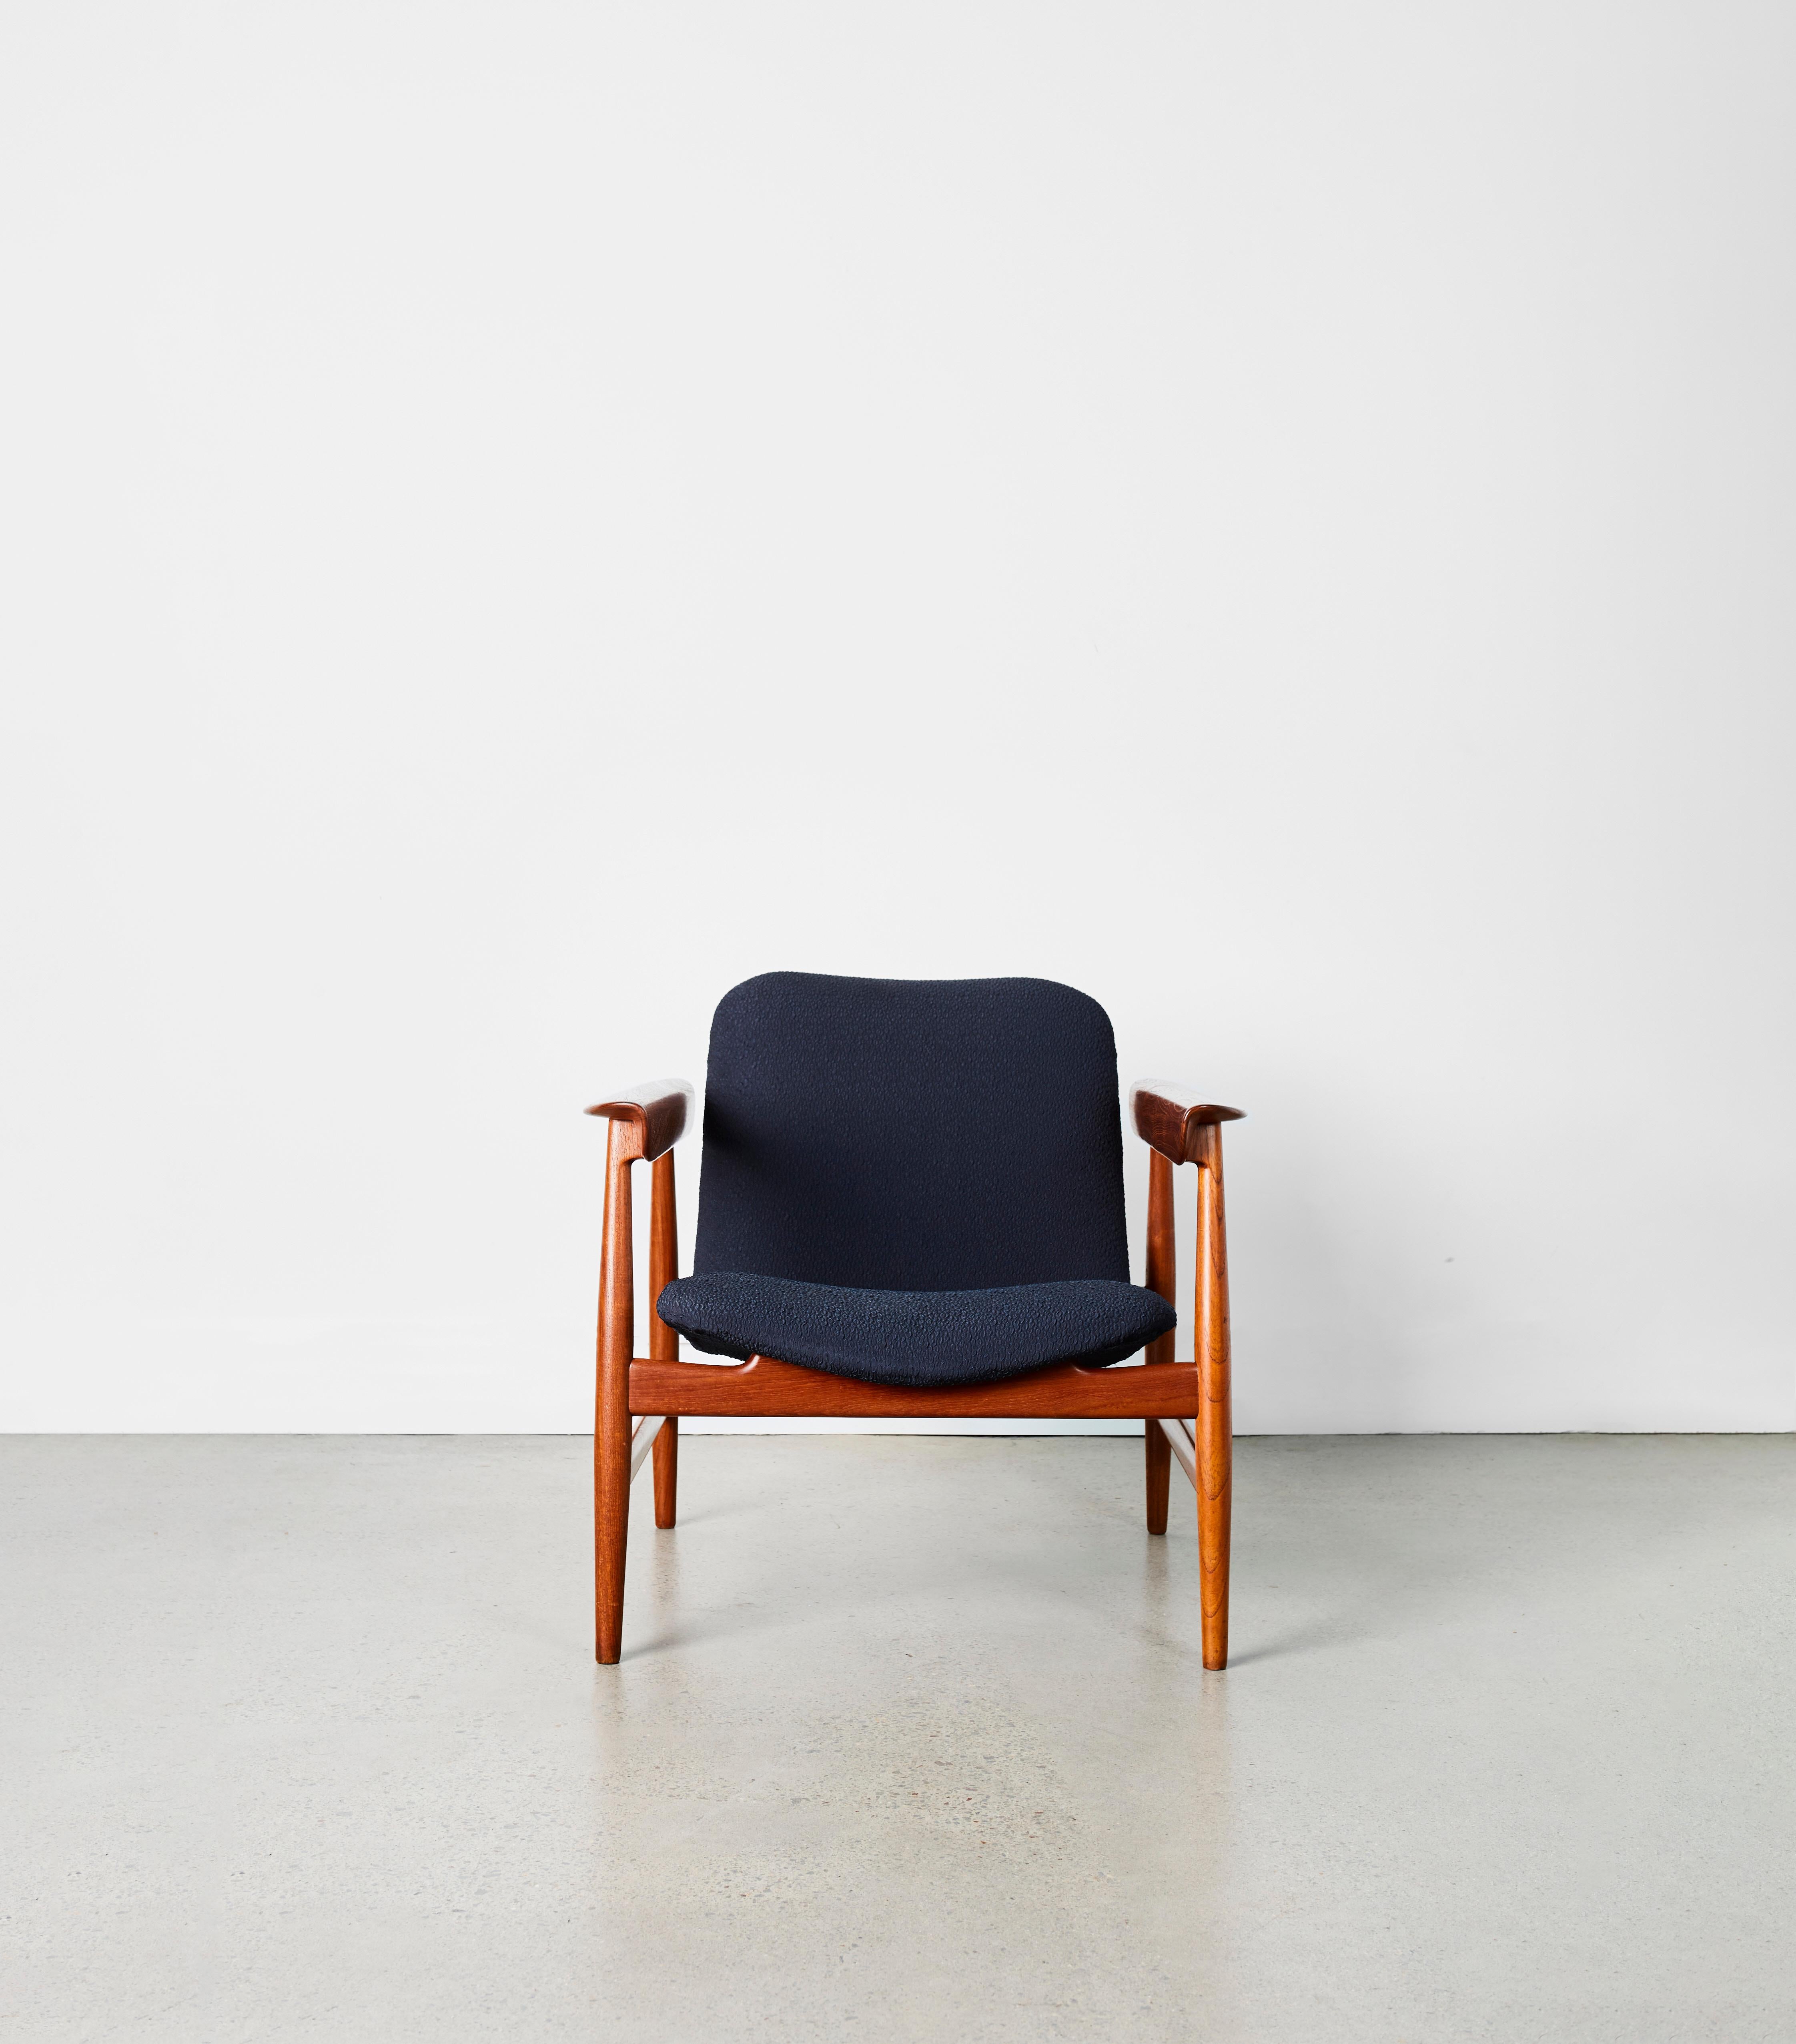 This incredibly beautiful Finn Juhl chair by Bovirke BO-118 is a true statement. This chair has been restored and upholstered in a stunning deep blue fabric

A rare chair by Bovirke executed in teak. Beautifully simple and visually dramatic. the